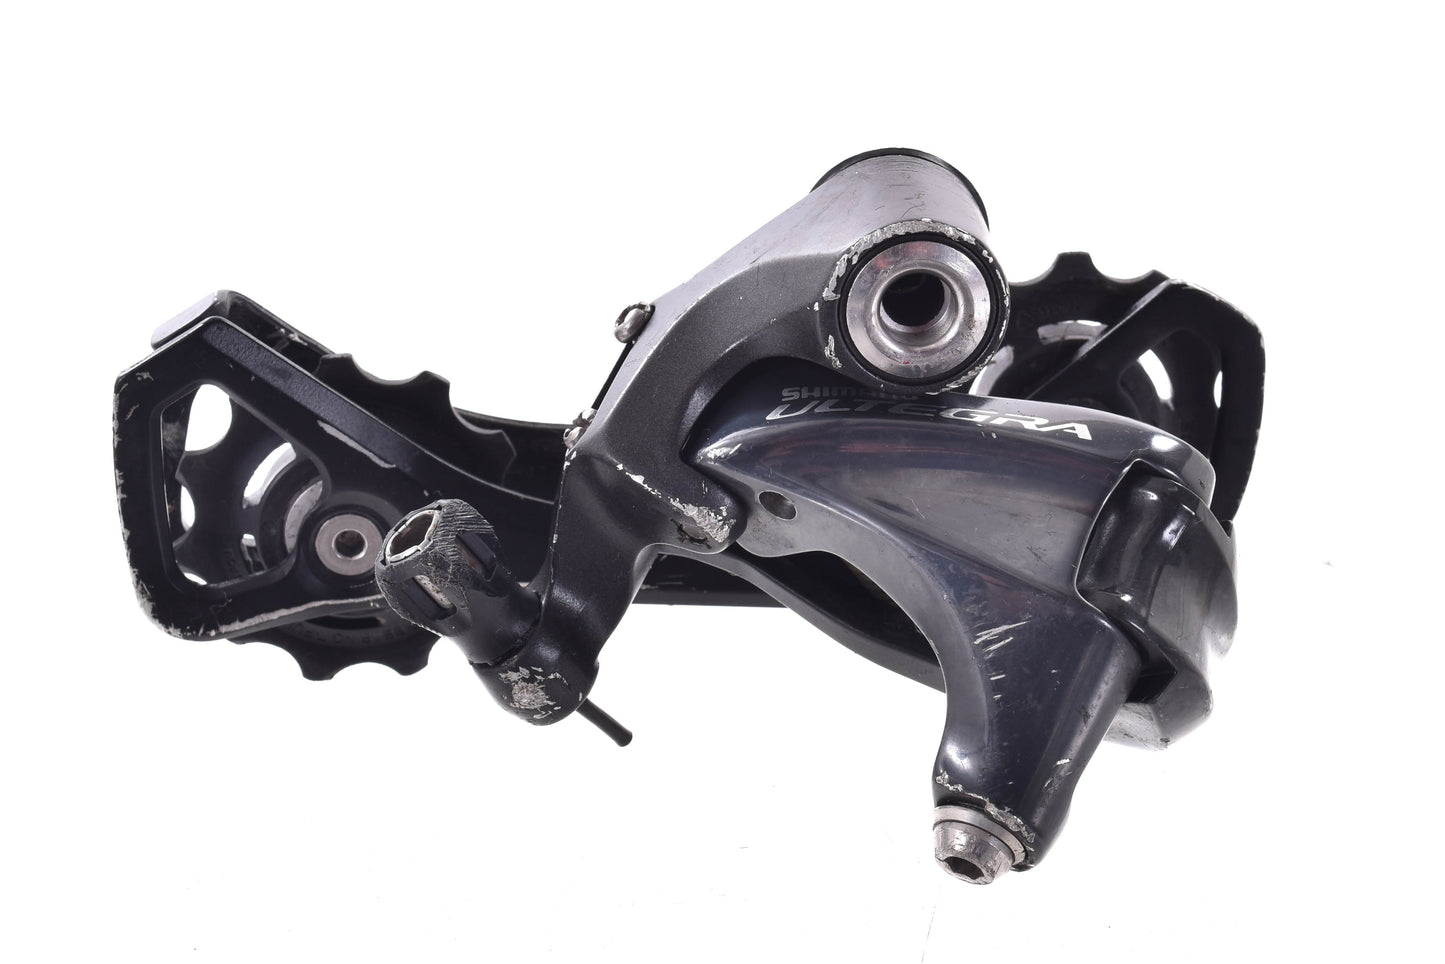 USED Shimano Ultegra 6800 2x11 speed Mechanical Road Groupset Medium Cage 11-32t ST, FD, RD, BR